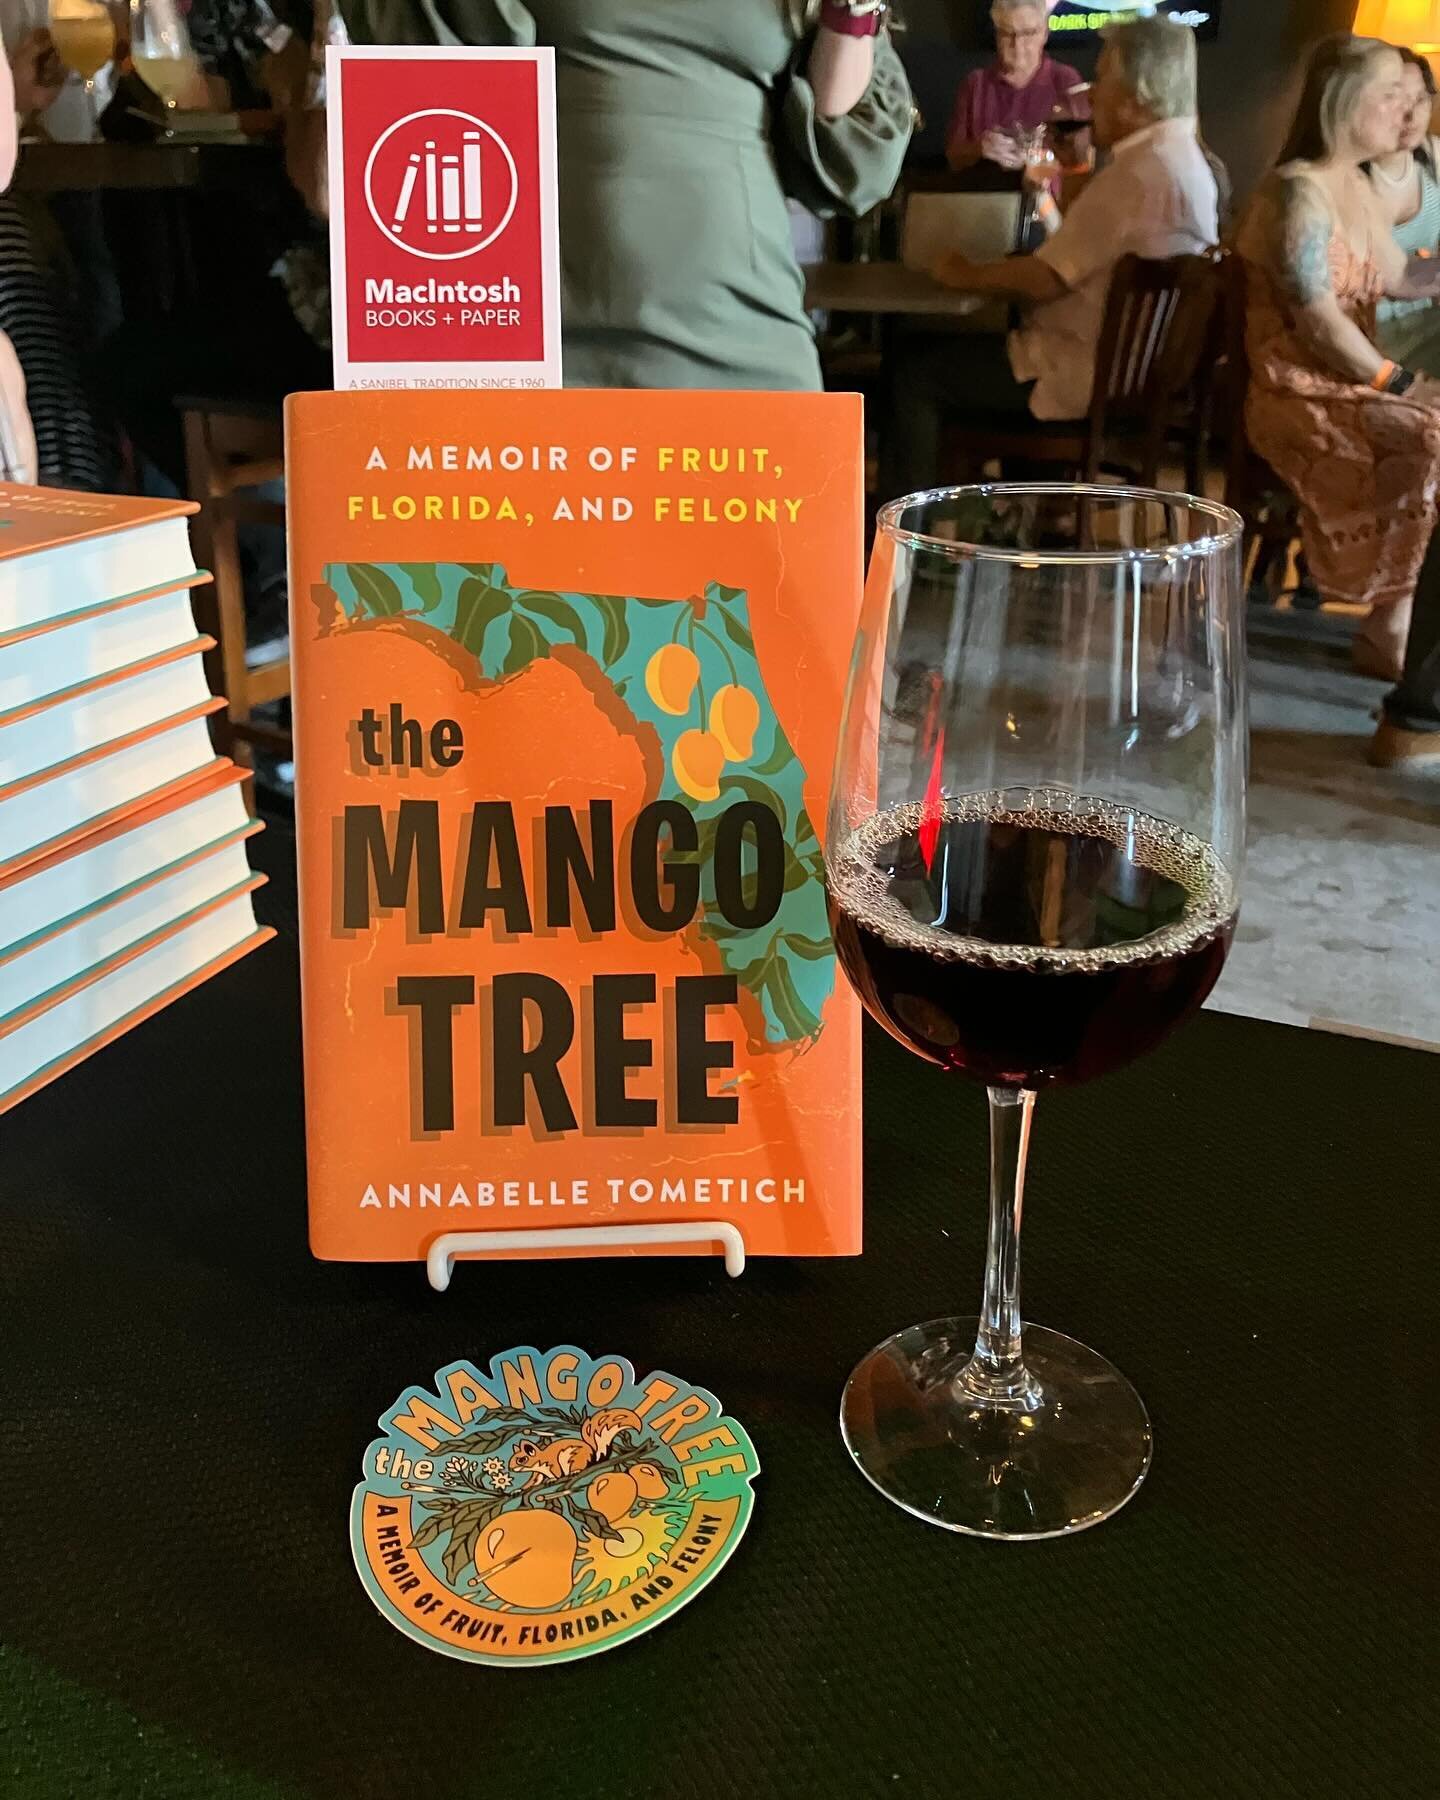 We had so much fun at the Mango Tree event this week!  Amazing crowd, yummy wine + food, and this book is simply fantastic.  We sold out, but more copies will be in our #sanibel shop tomorrow and we&rsquo;re happy to ship. Congrats to Annabelle and c